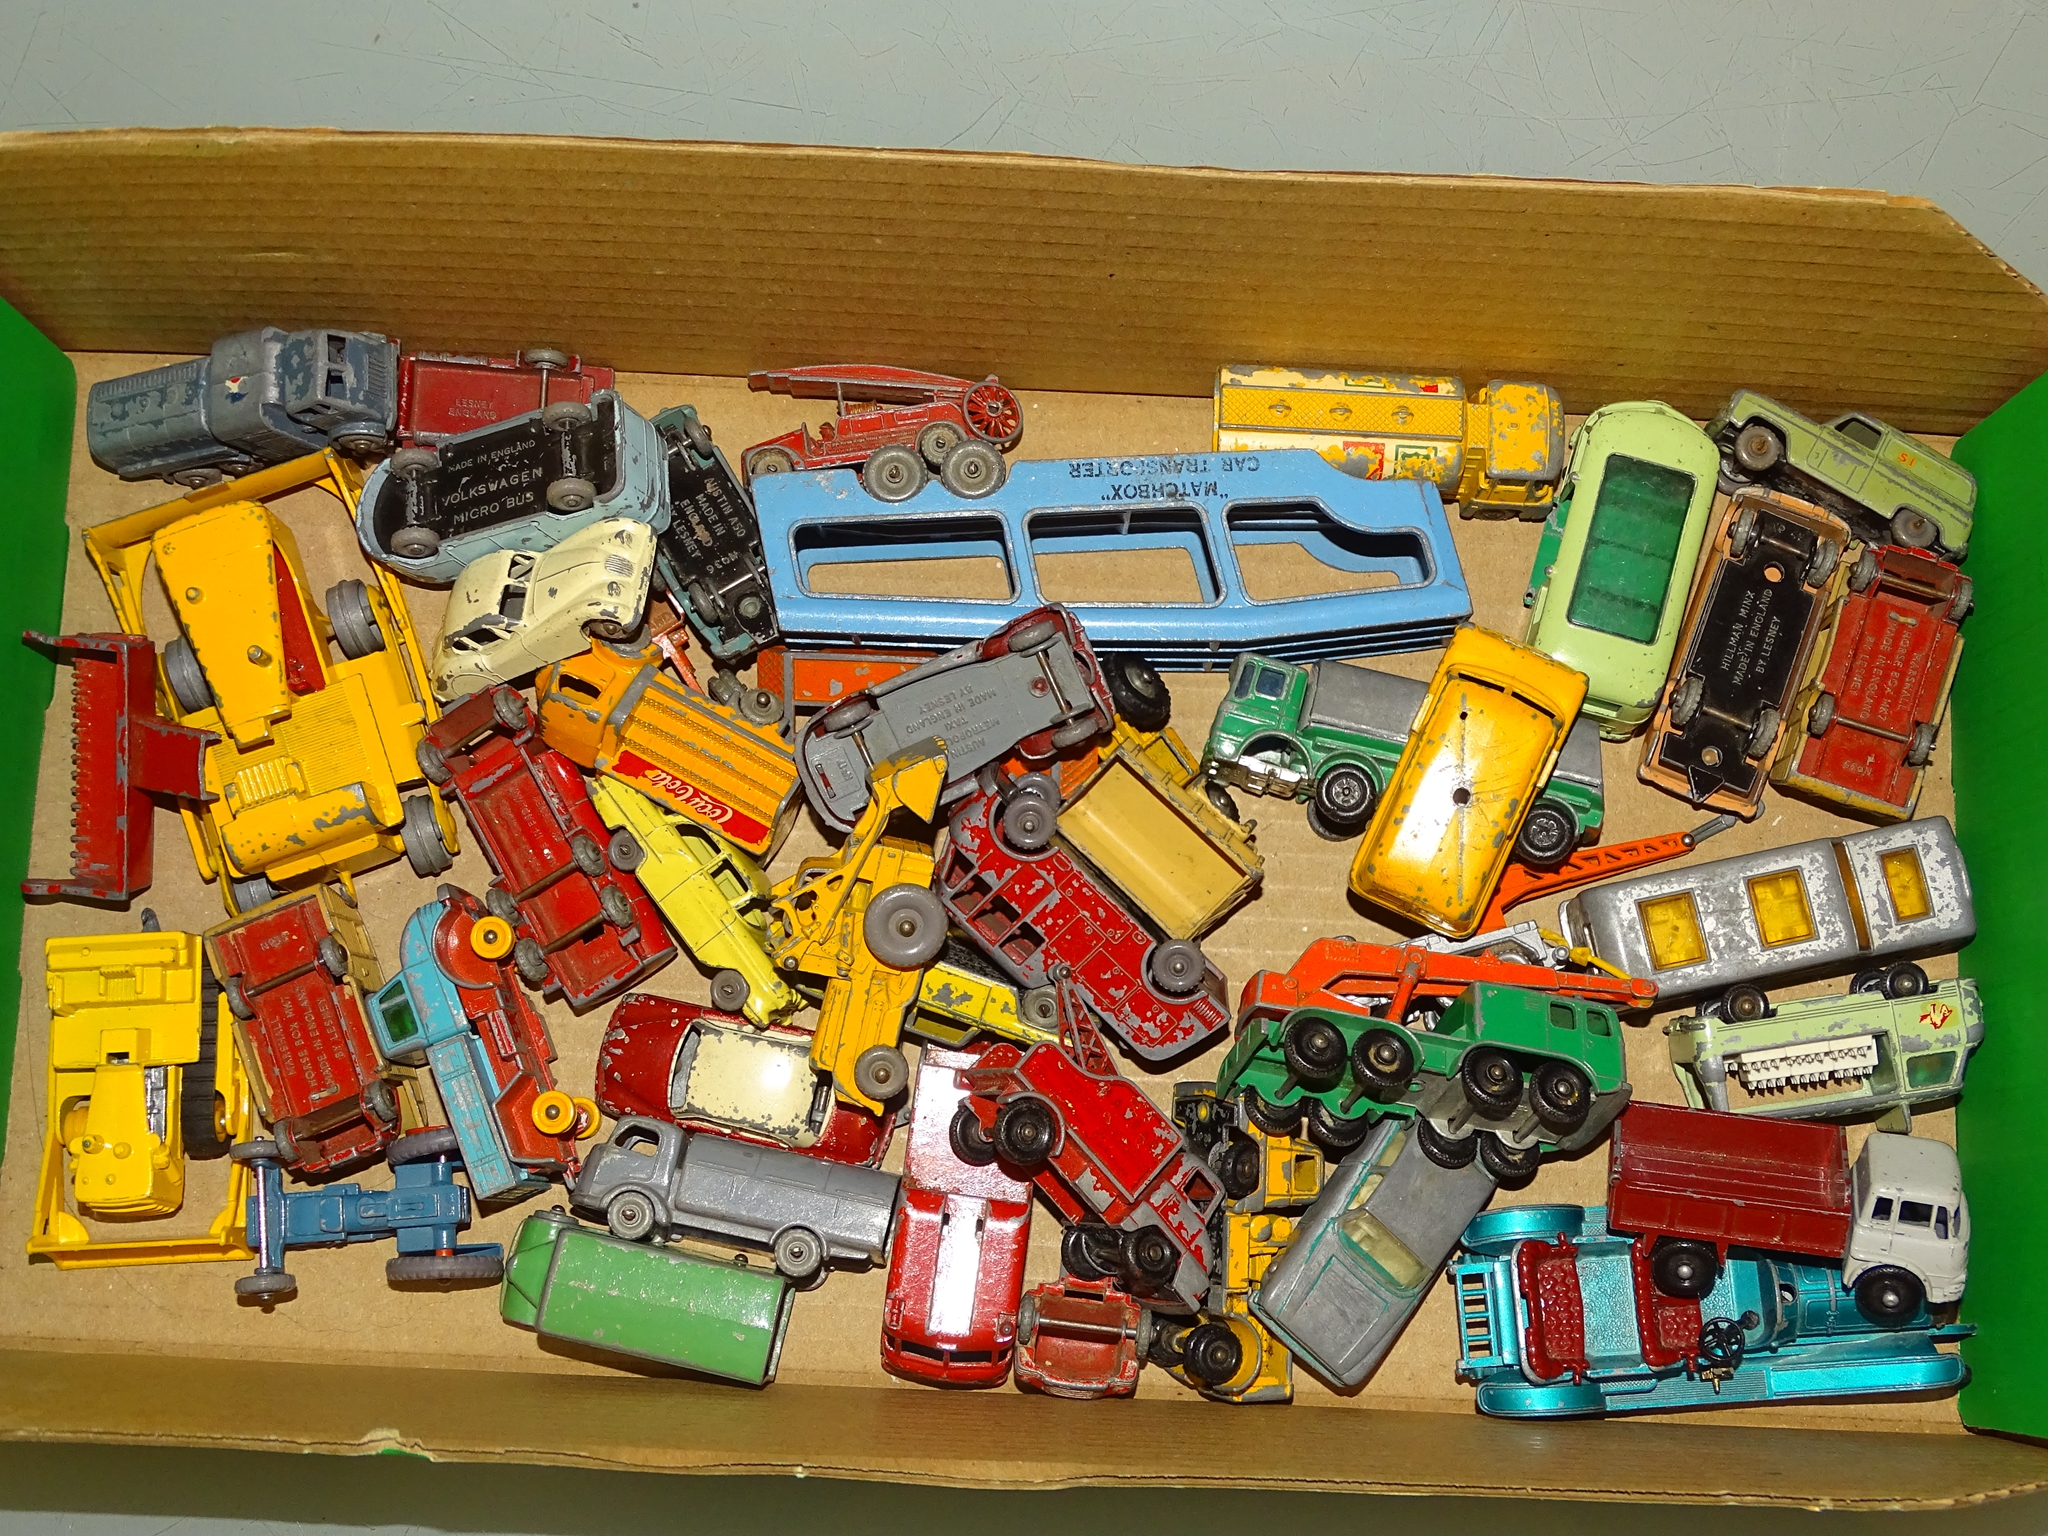 A tray of mixed diecast cars, vans, lorries etc by MATCHBOX in playworn condition - P/G - unboxed (